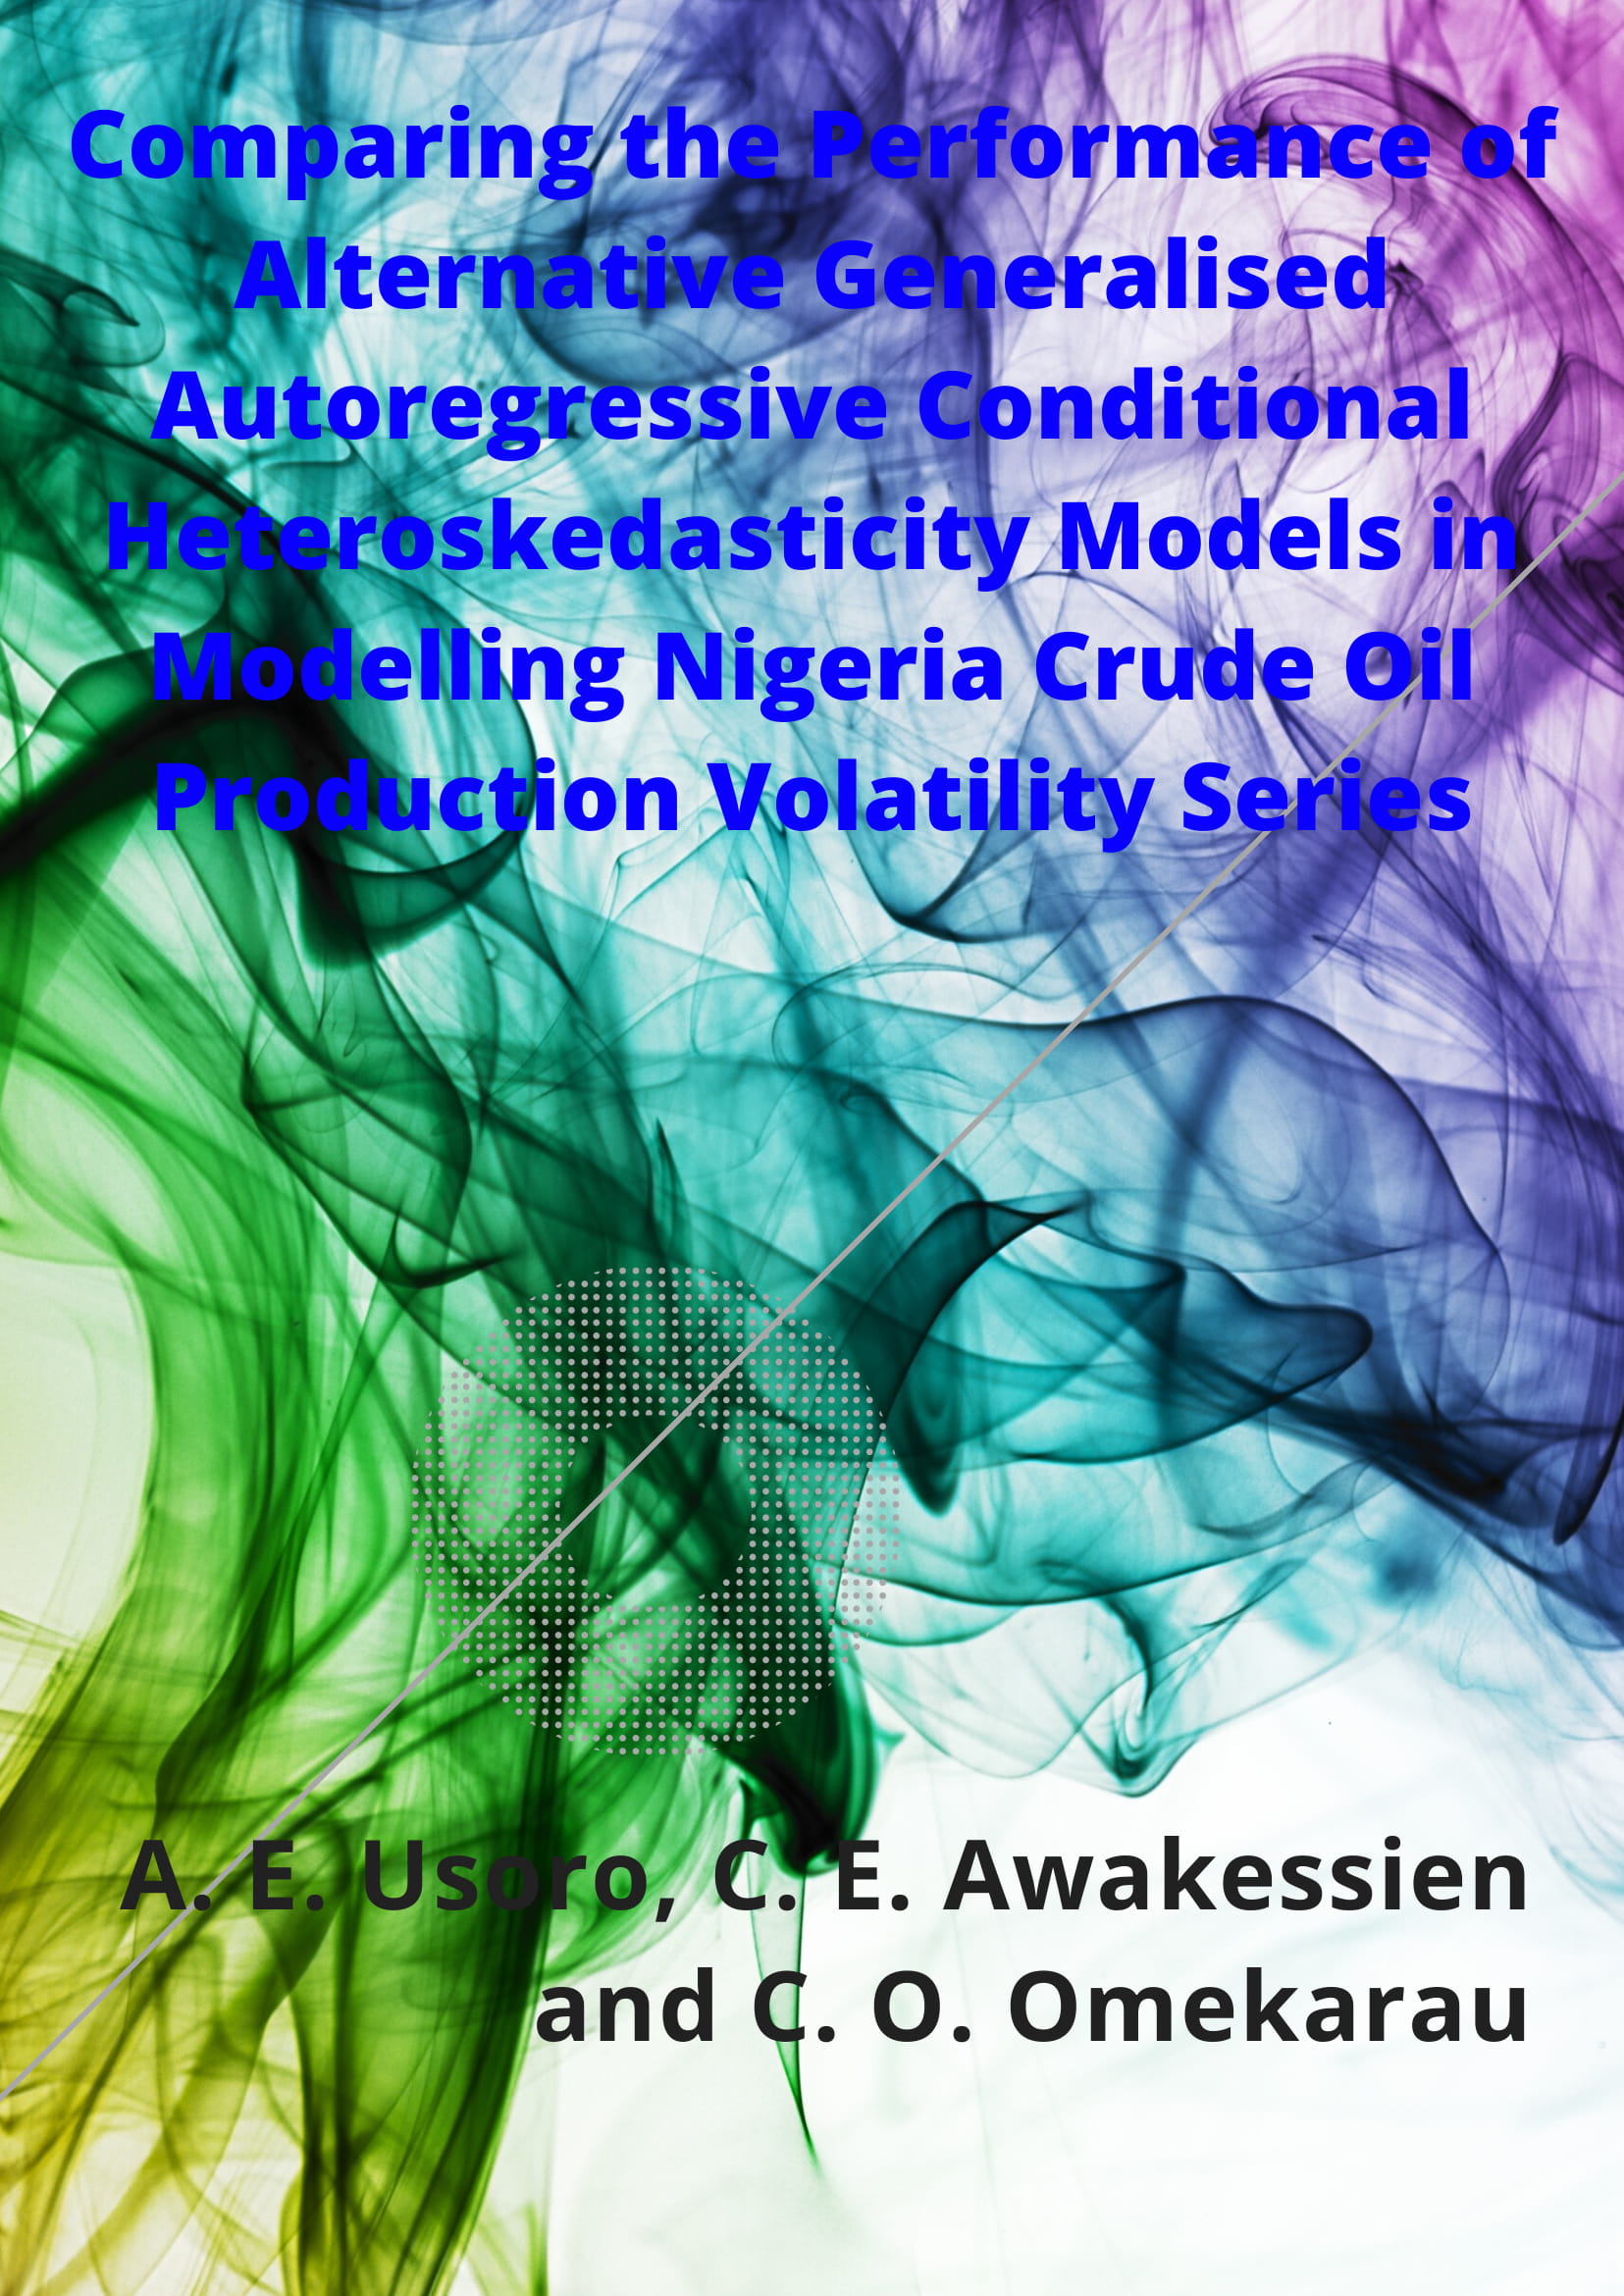 Comparing the Performance of Alternative Generalised Autoregressive Conditional Heteroskedasticity Models in Modelling Nigeria Crude Oil Production Volatility Series image